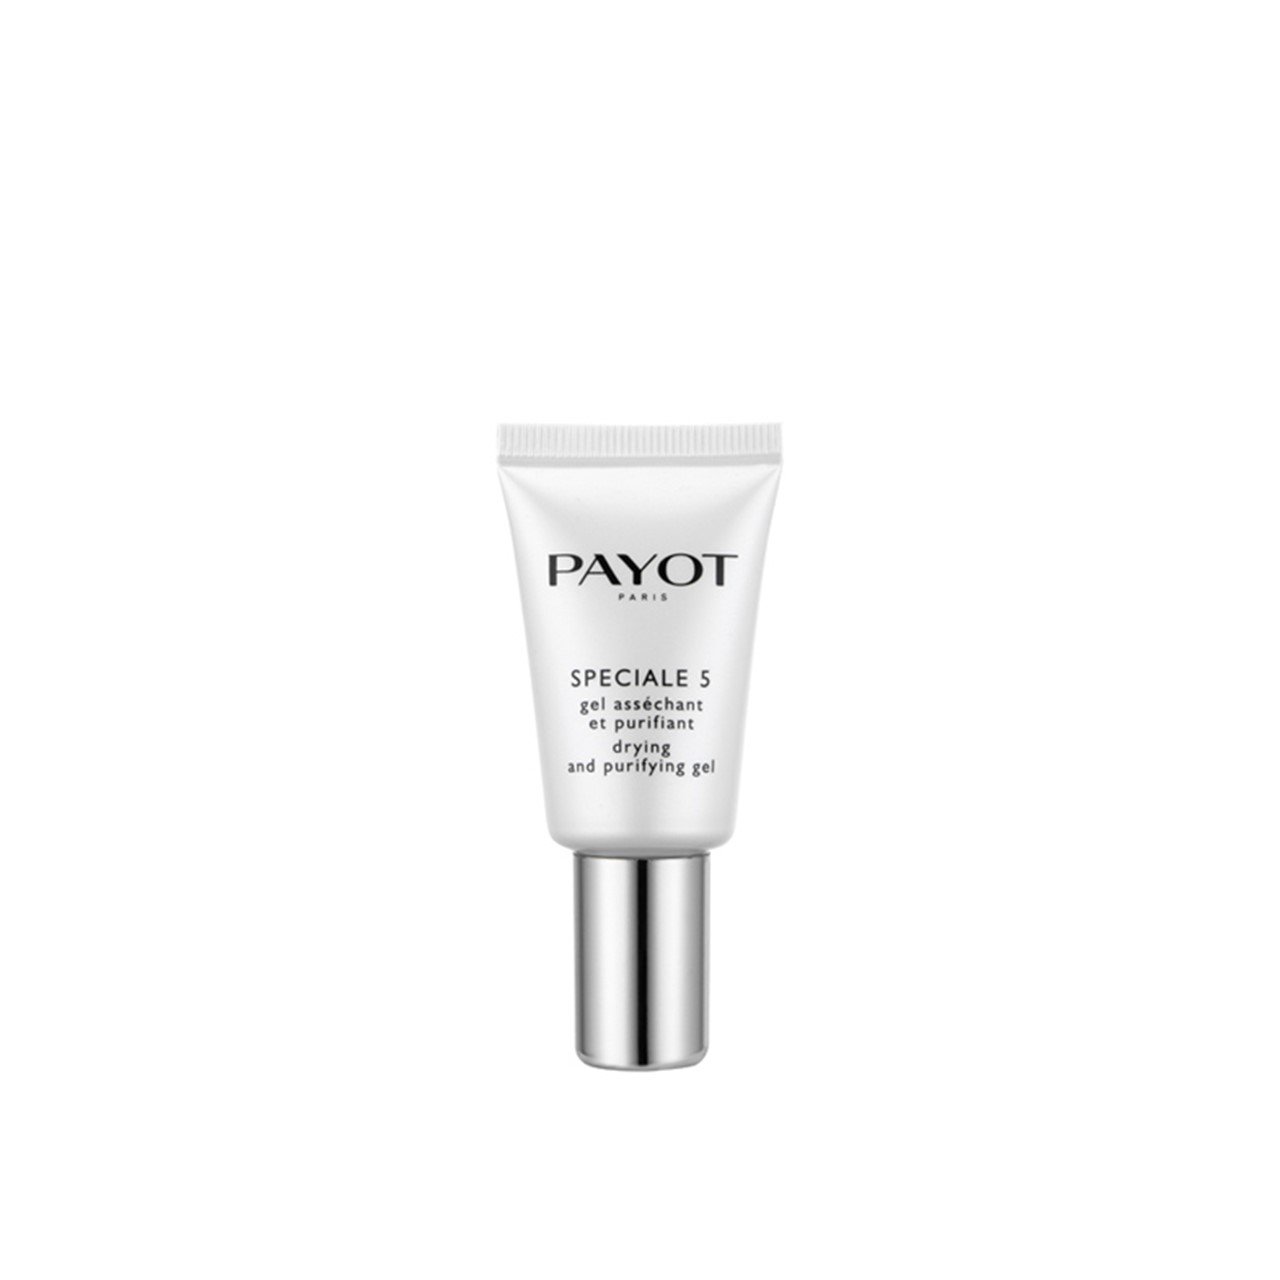 Payot Pâte Grise Spéciale 5 Drying Purifying Care 15ml